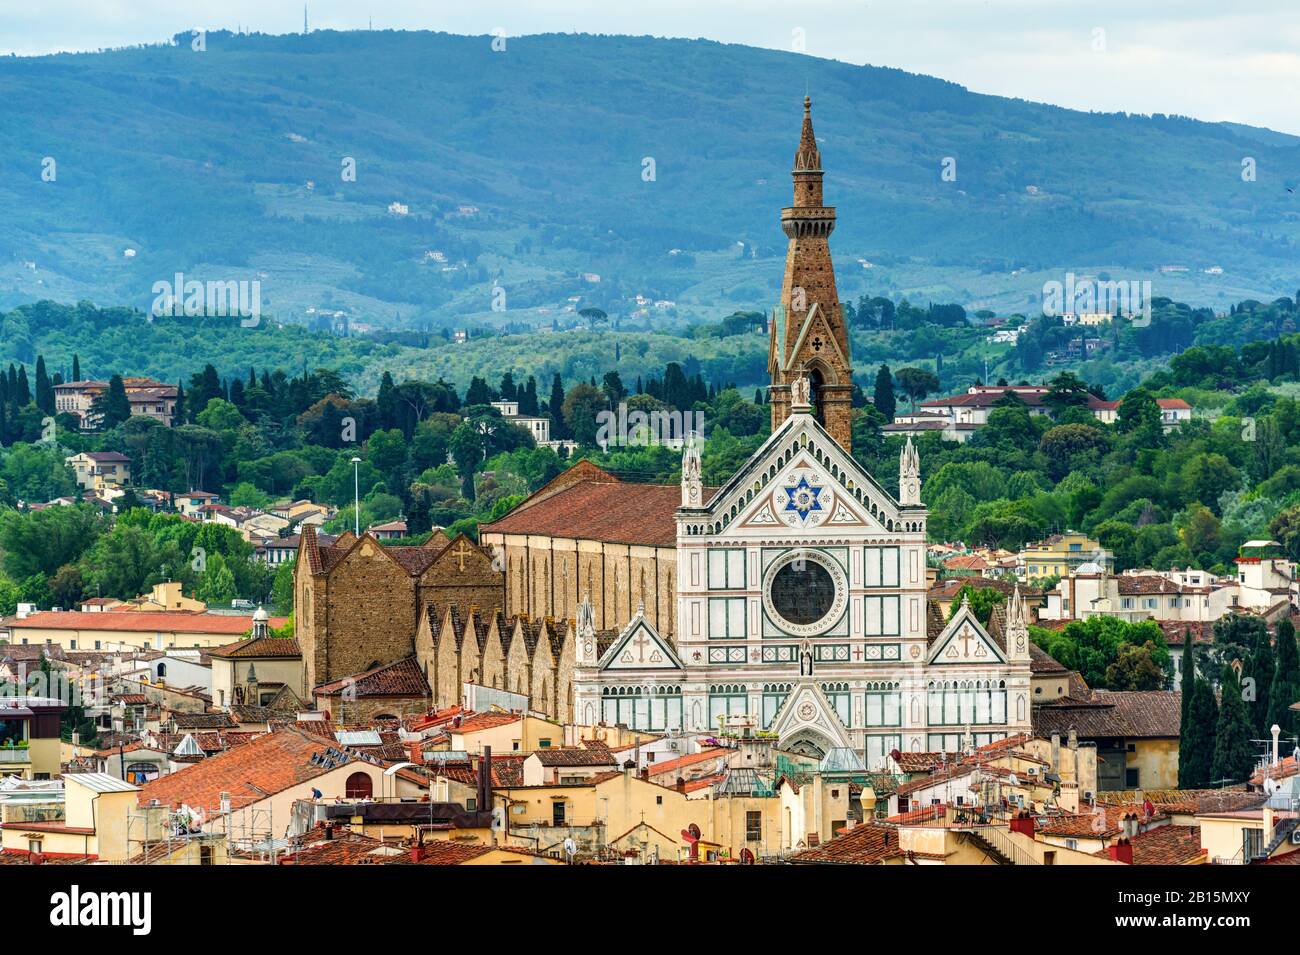 The Basilica of Santa Croce (Basilica of the Holy Cross) in Florence, Italy Stock Photo